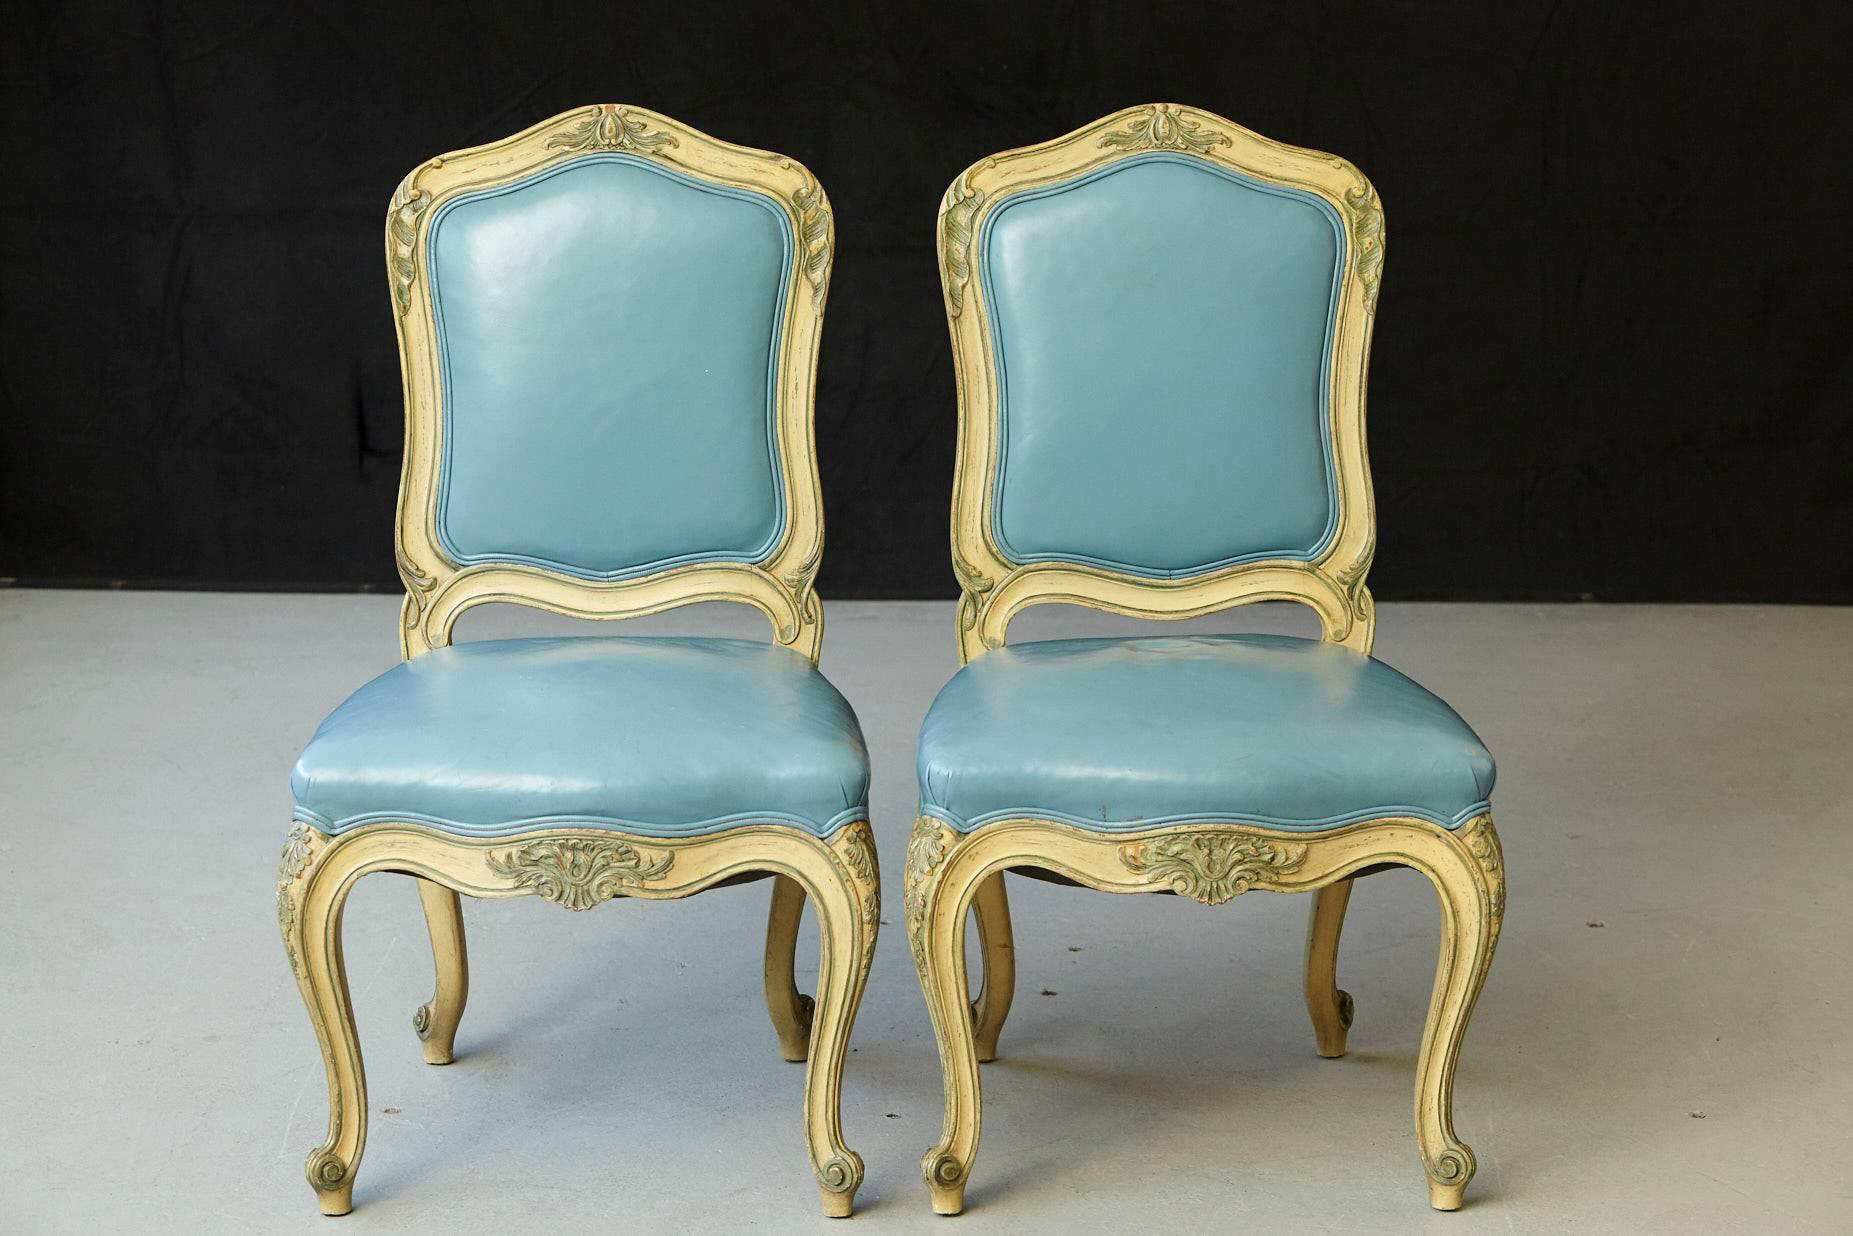 Exceptional pair of French Louis XV style side chairs with antiqued blue and white finish, on frames and cabriole legs with carved knee mounts.
Custom Upholstered in powder blue leather seat and back.
Light scratch in the leather on and chair,